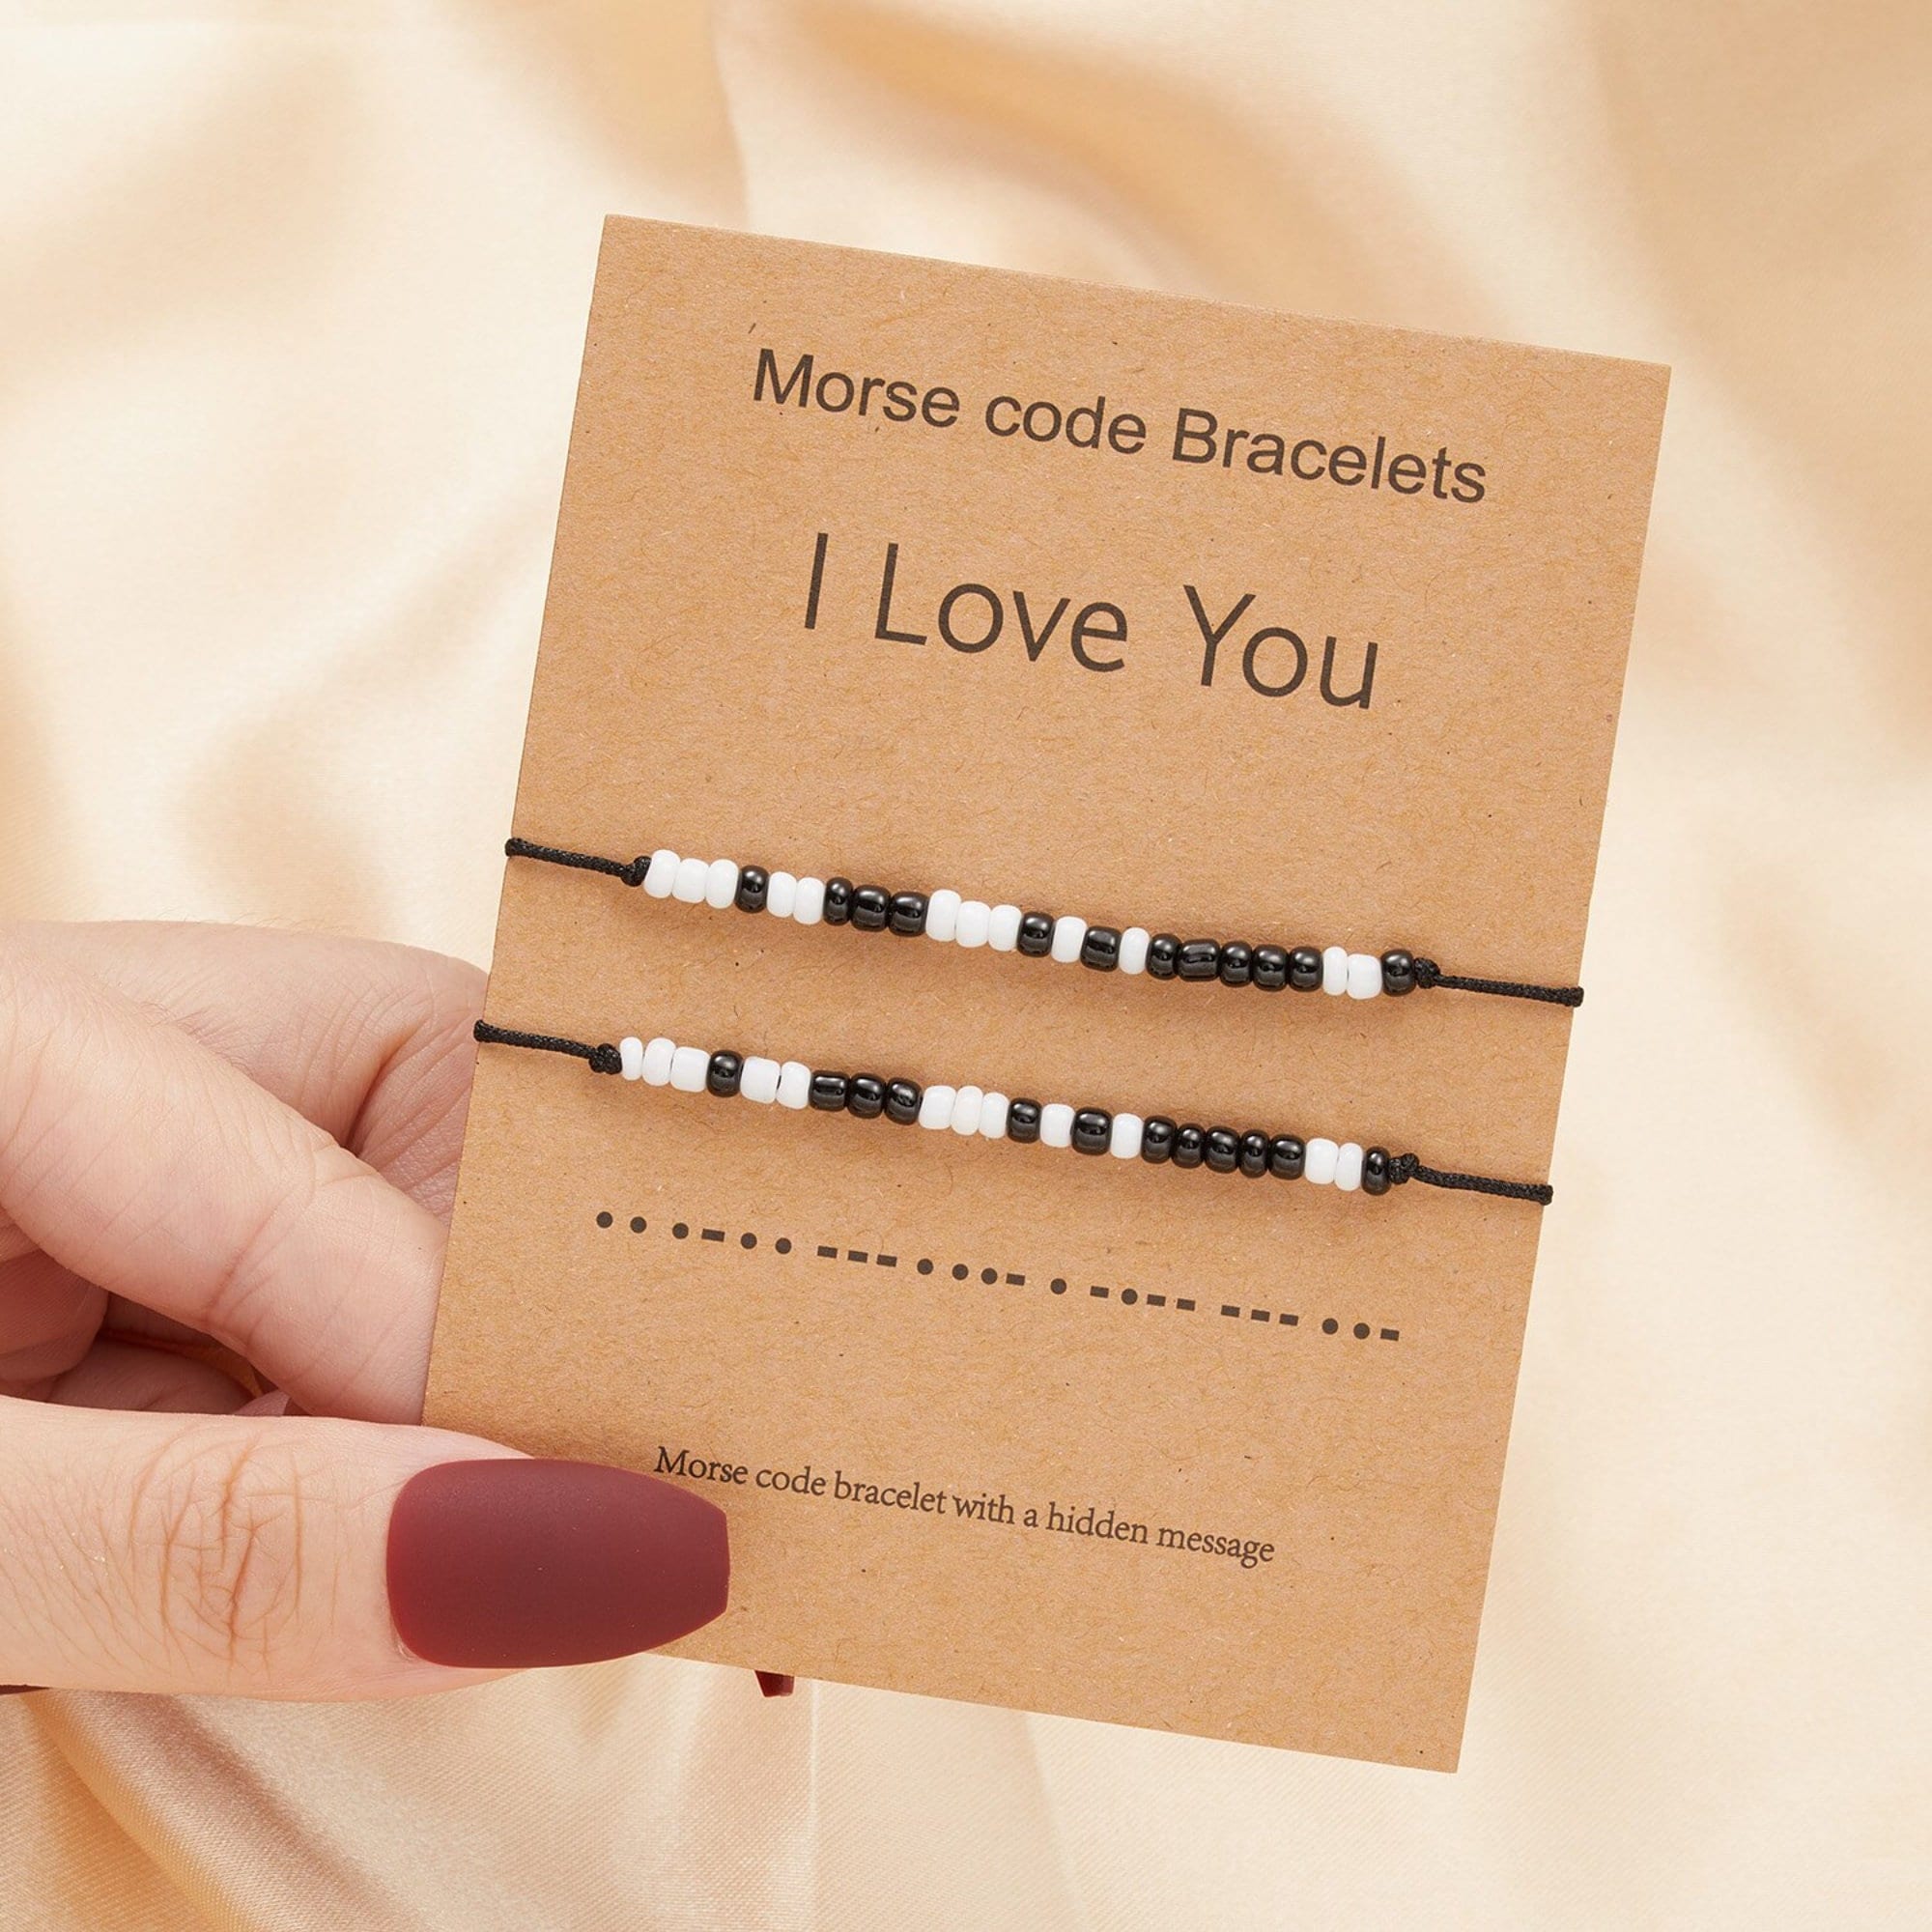 How To Make A Secret Morse Code Bracelet - Running With Sisters